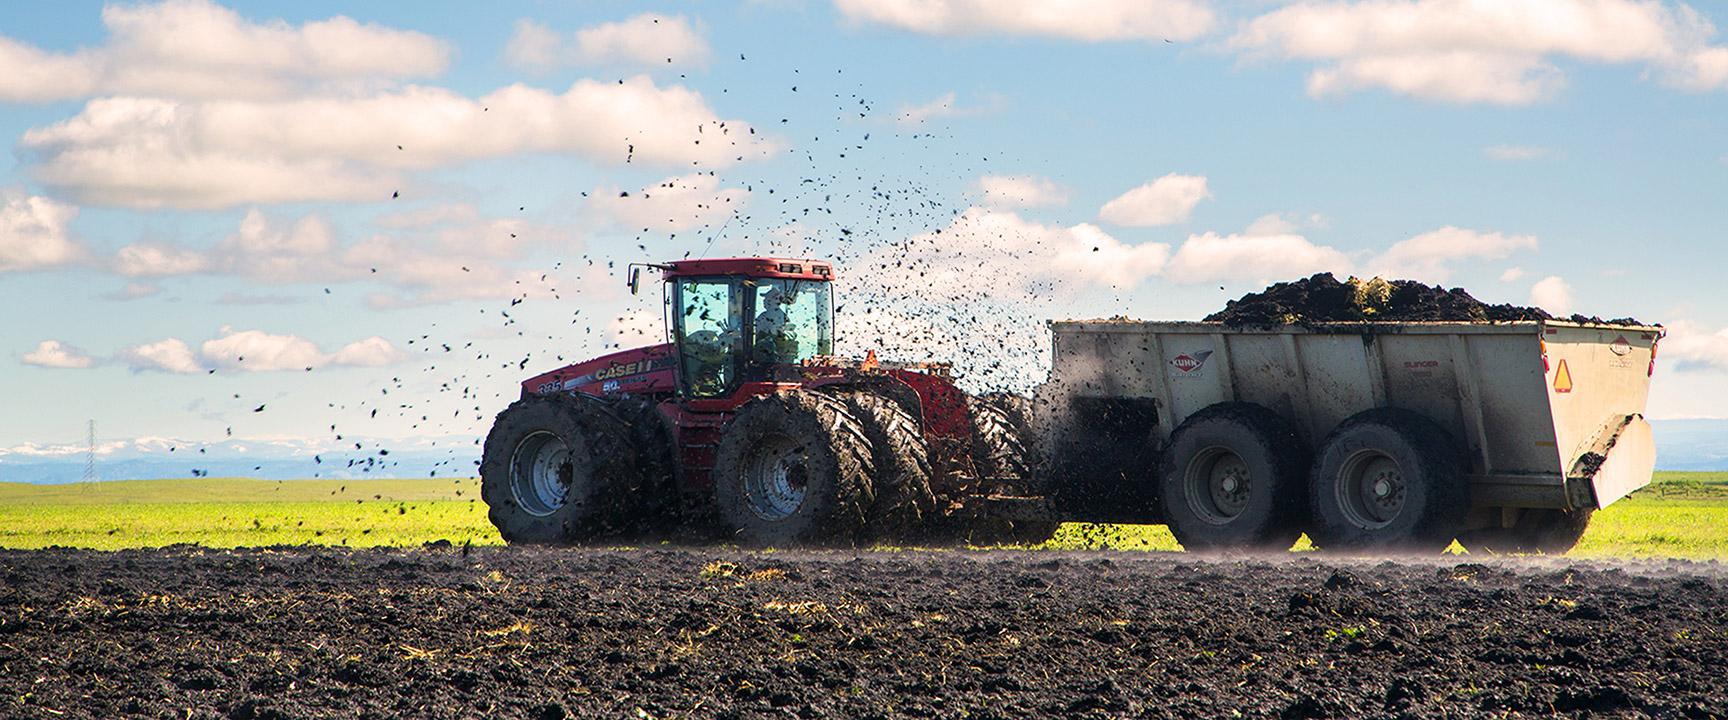 Biosolids being applied to a field 